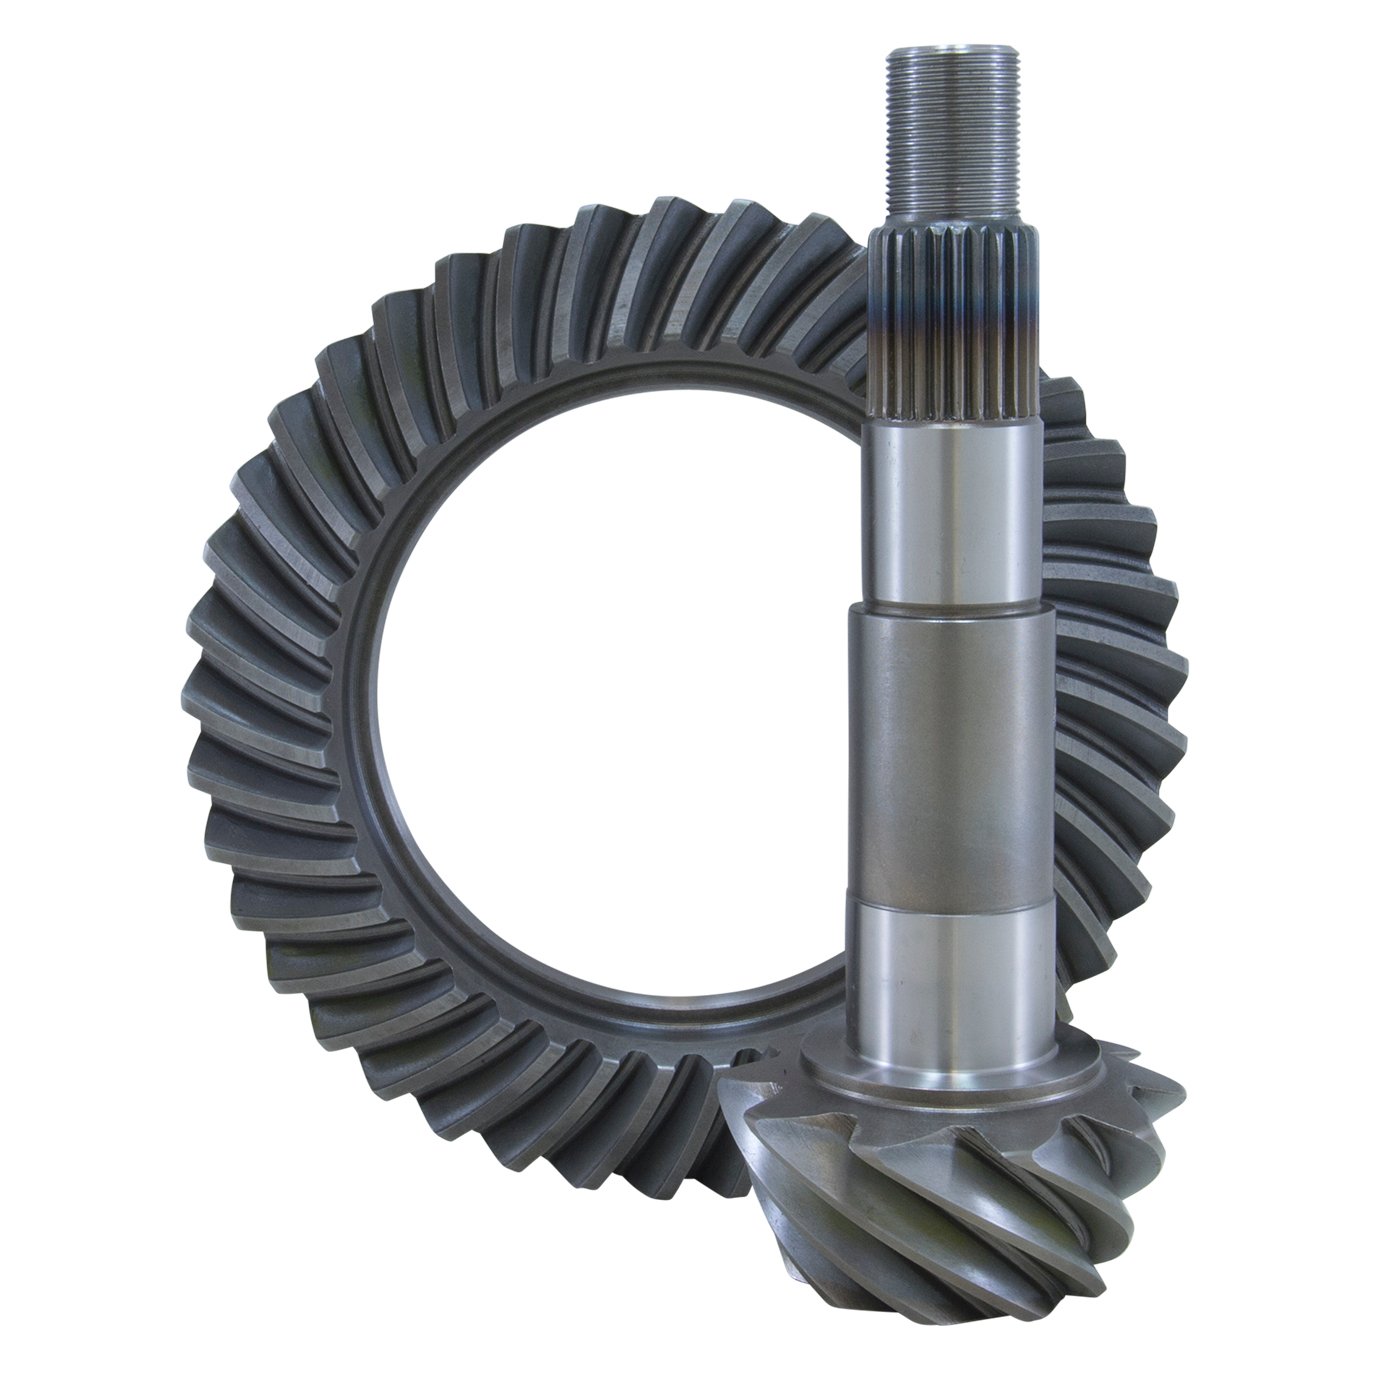 USA Standard ZG M35-513 Ring & Pinion Gear Set, For Model 35, 5.13 Ratio.